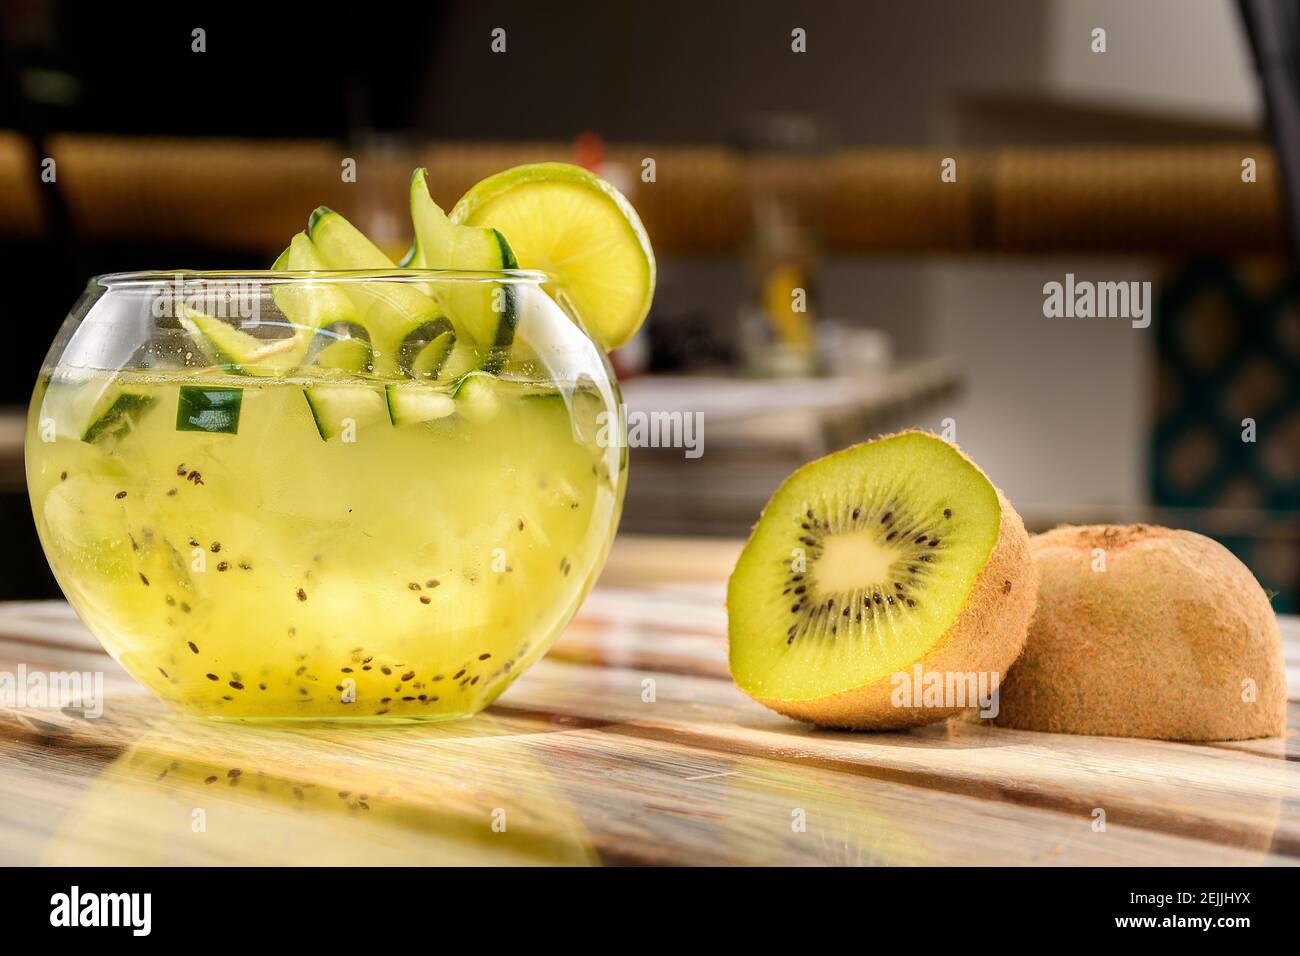 View of a refreshing kiwi flavored drink served in a fishbowl Stock Photo